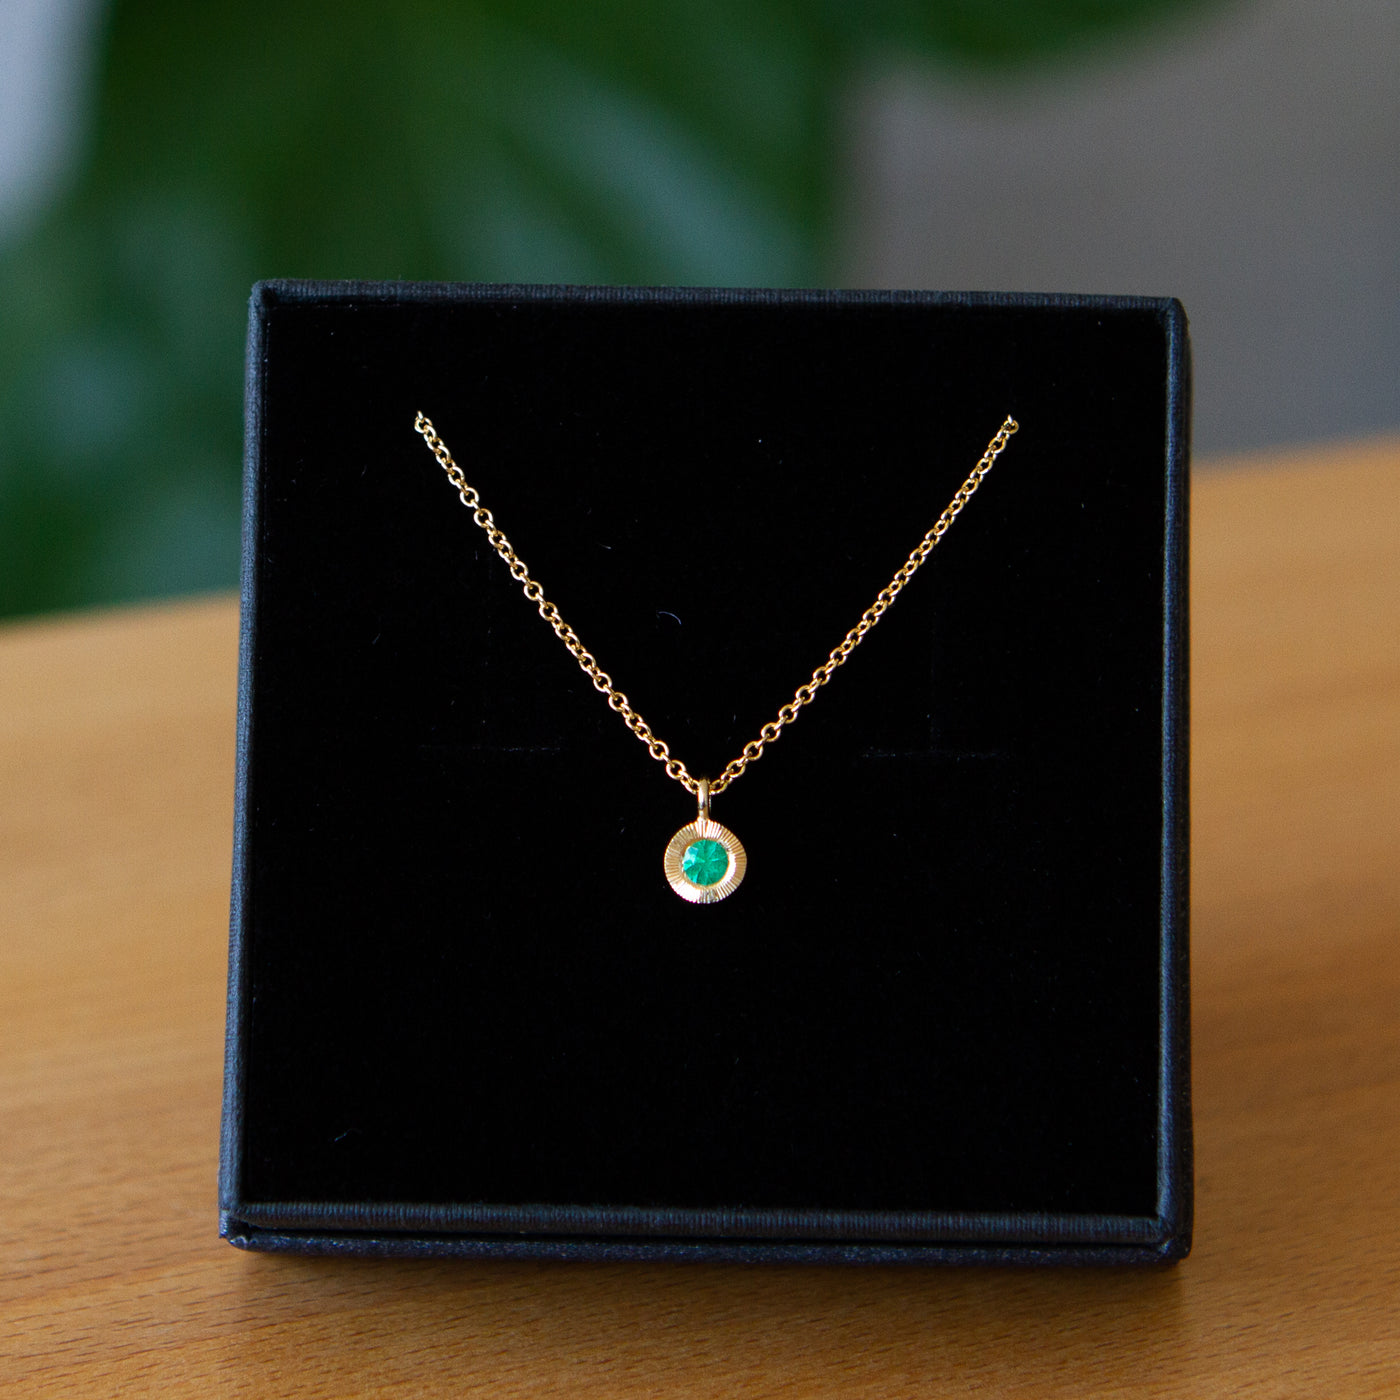 Emerald Small Aurora Pendant Necklace in Yellow Gold packaged in a black jewelry box